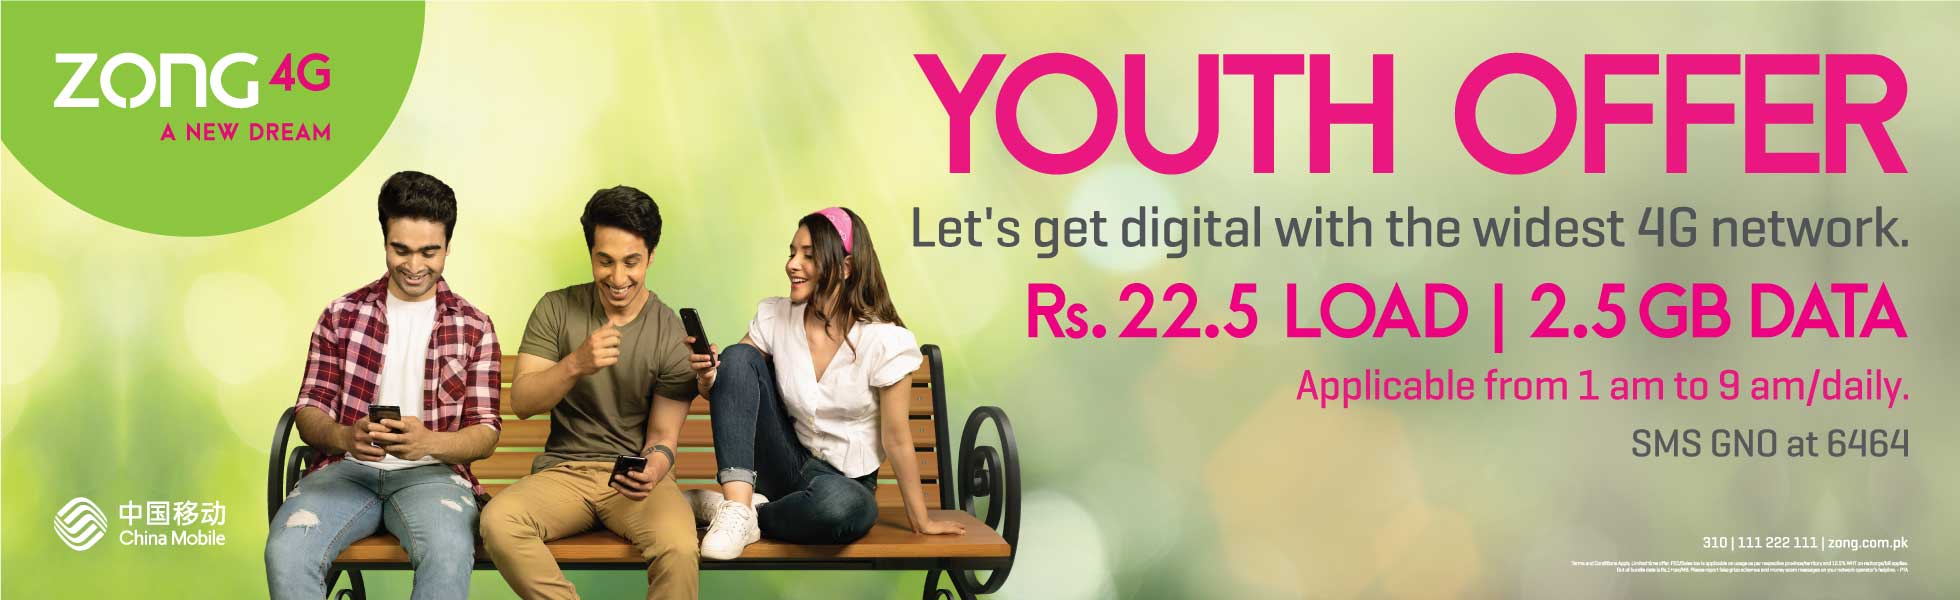 Zong Youth Offer Code Night Internet Package